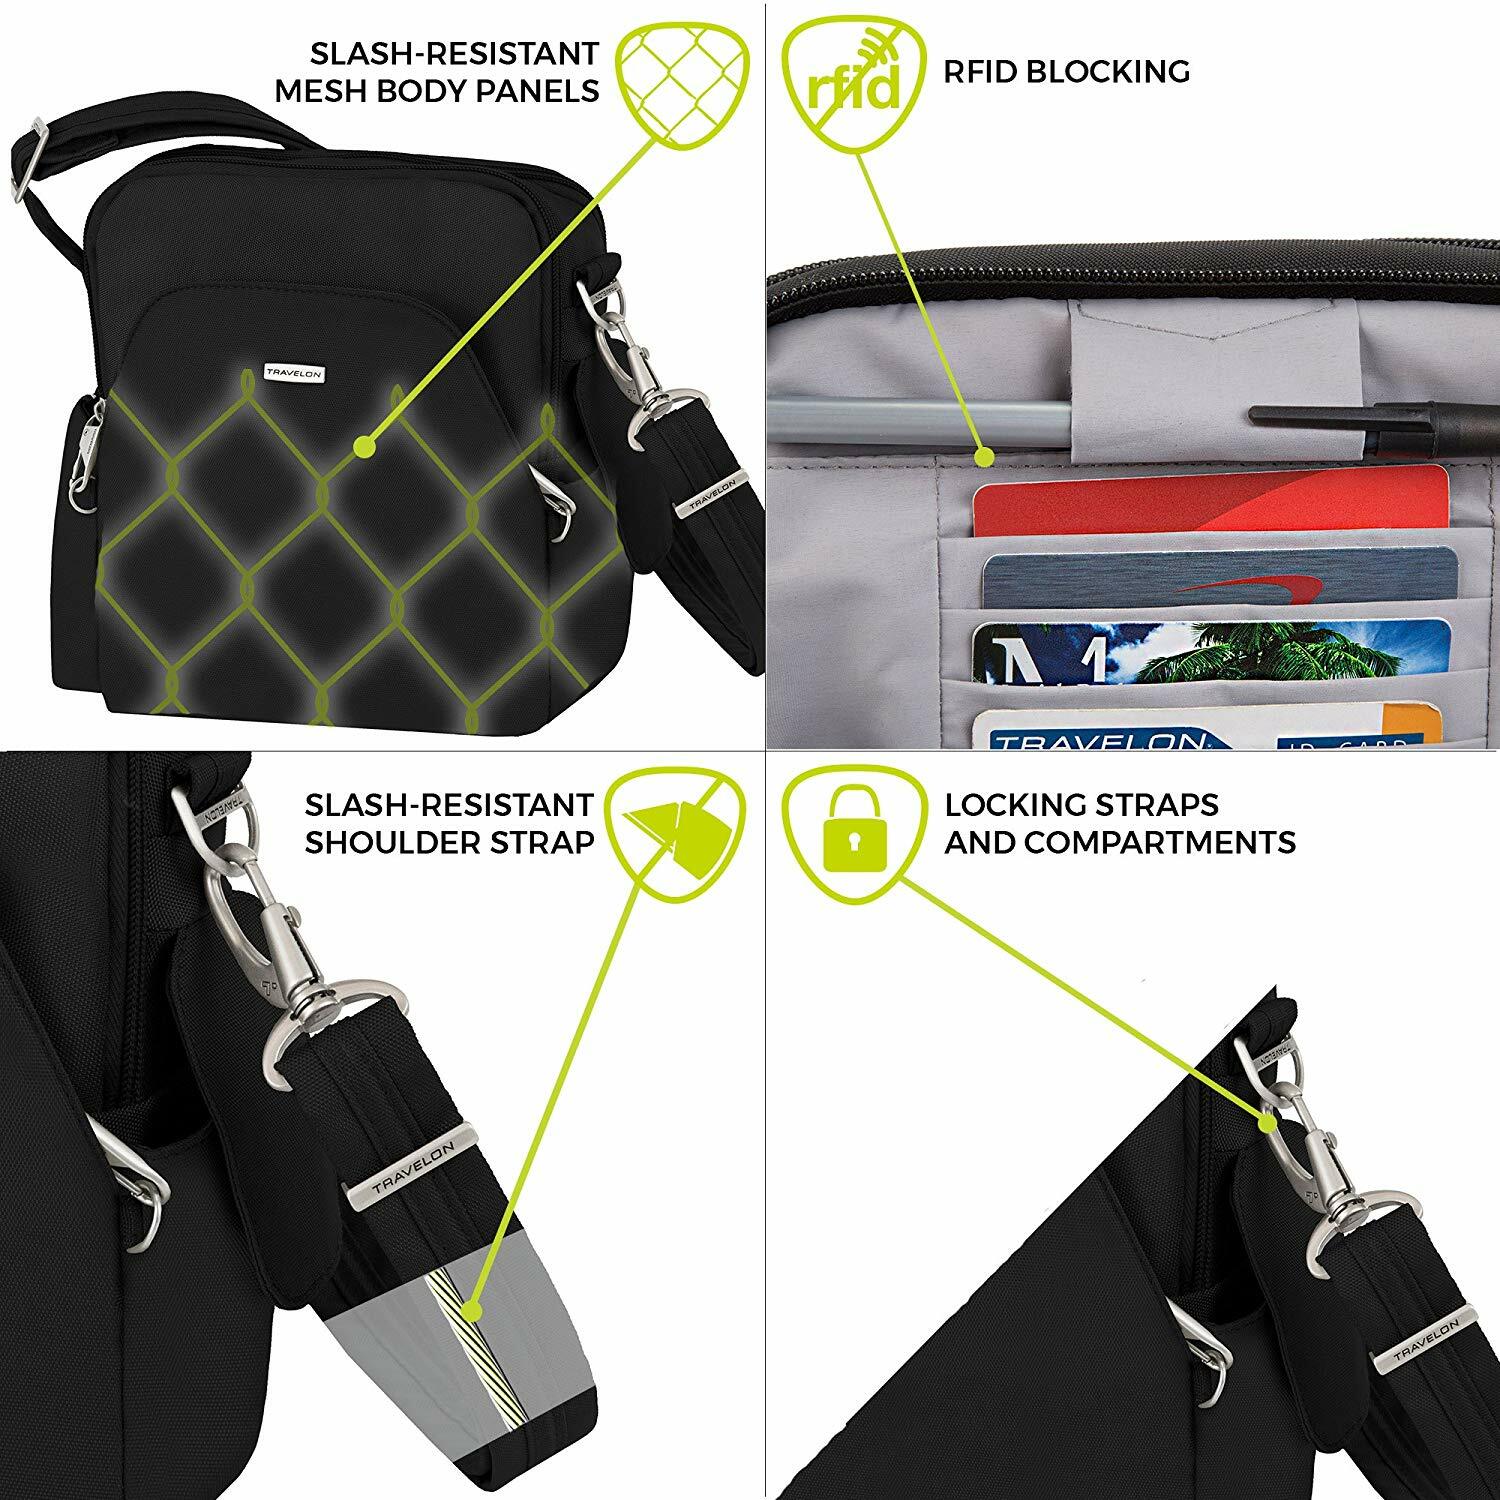 Travelon Anti-Theft Travel Bag with RFID protection